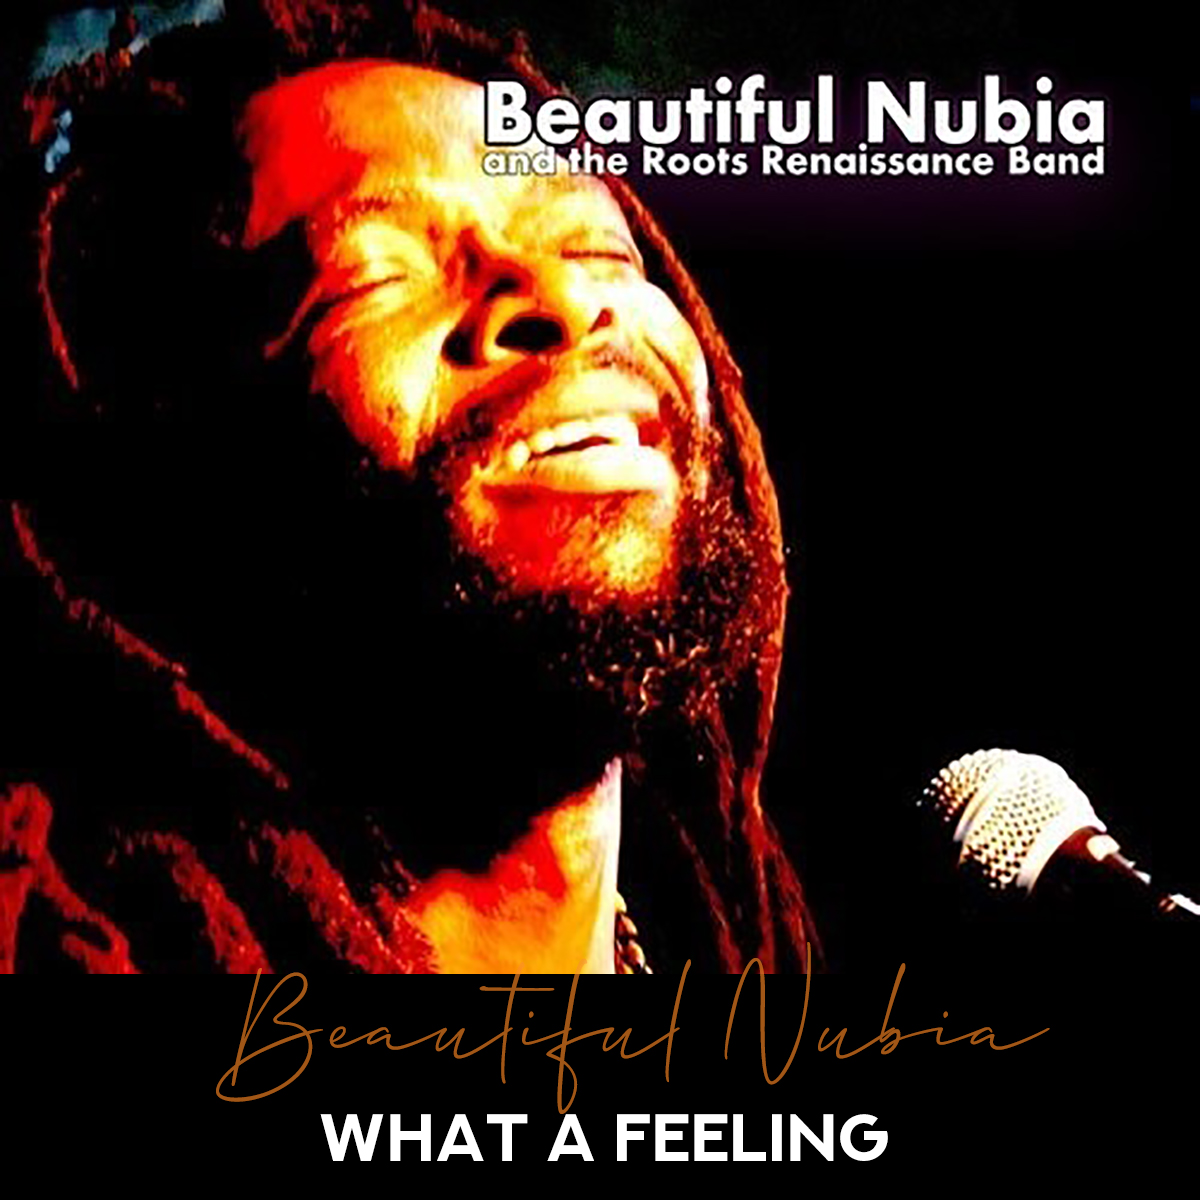 beautiful nubia what a feeling mp3 download